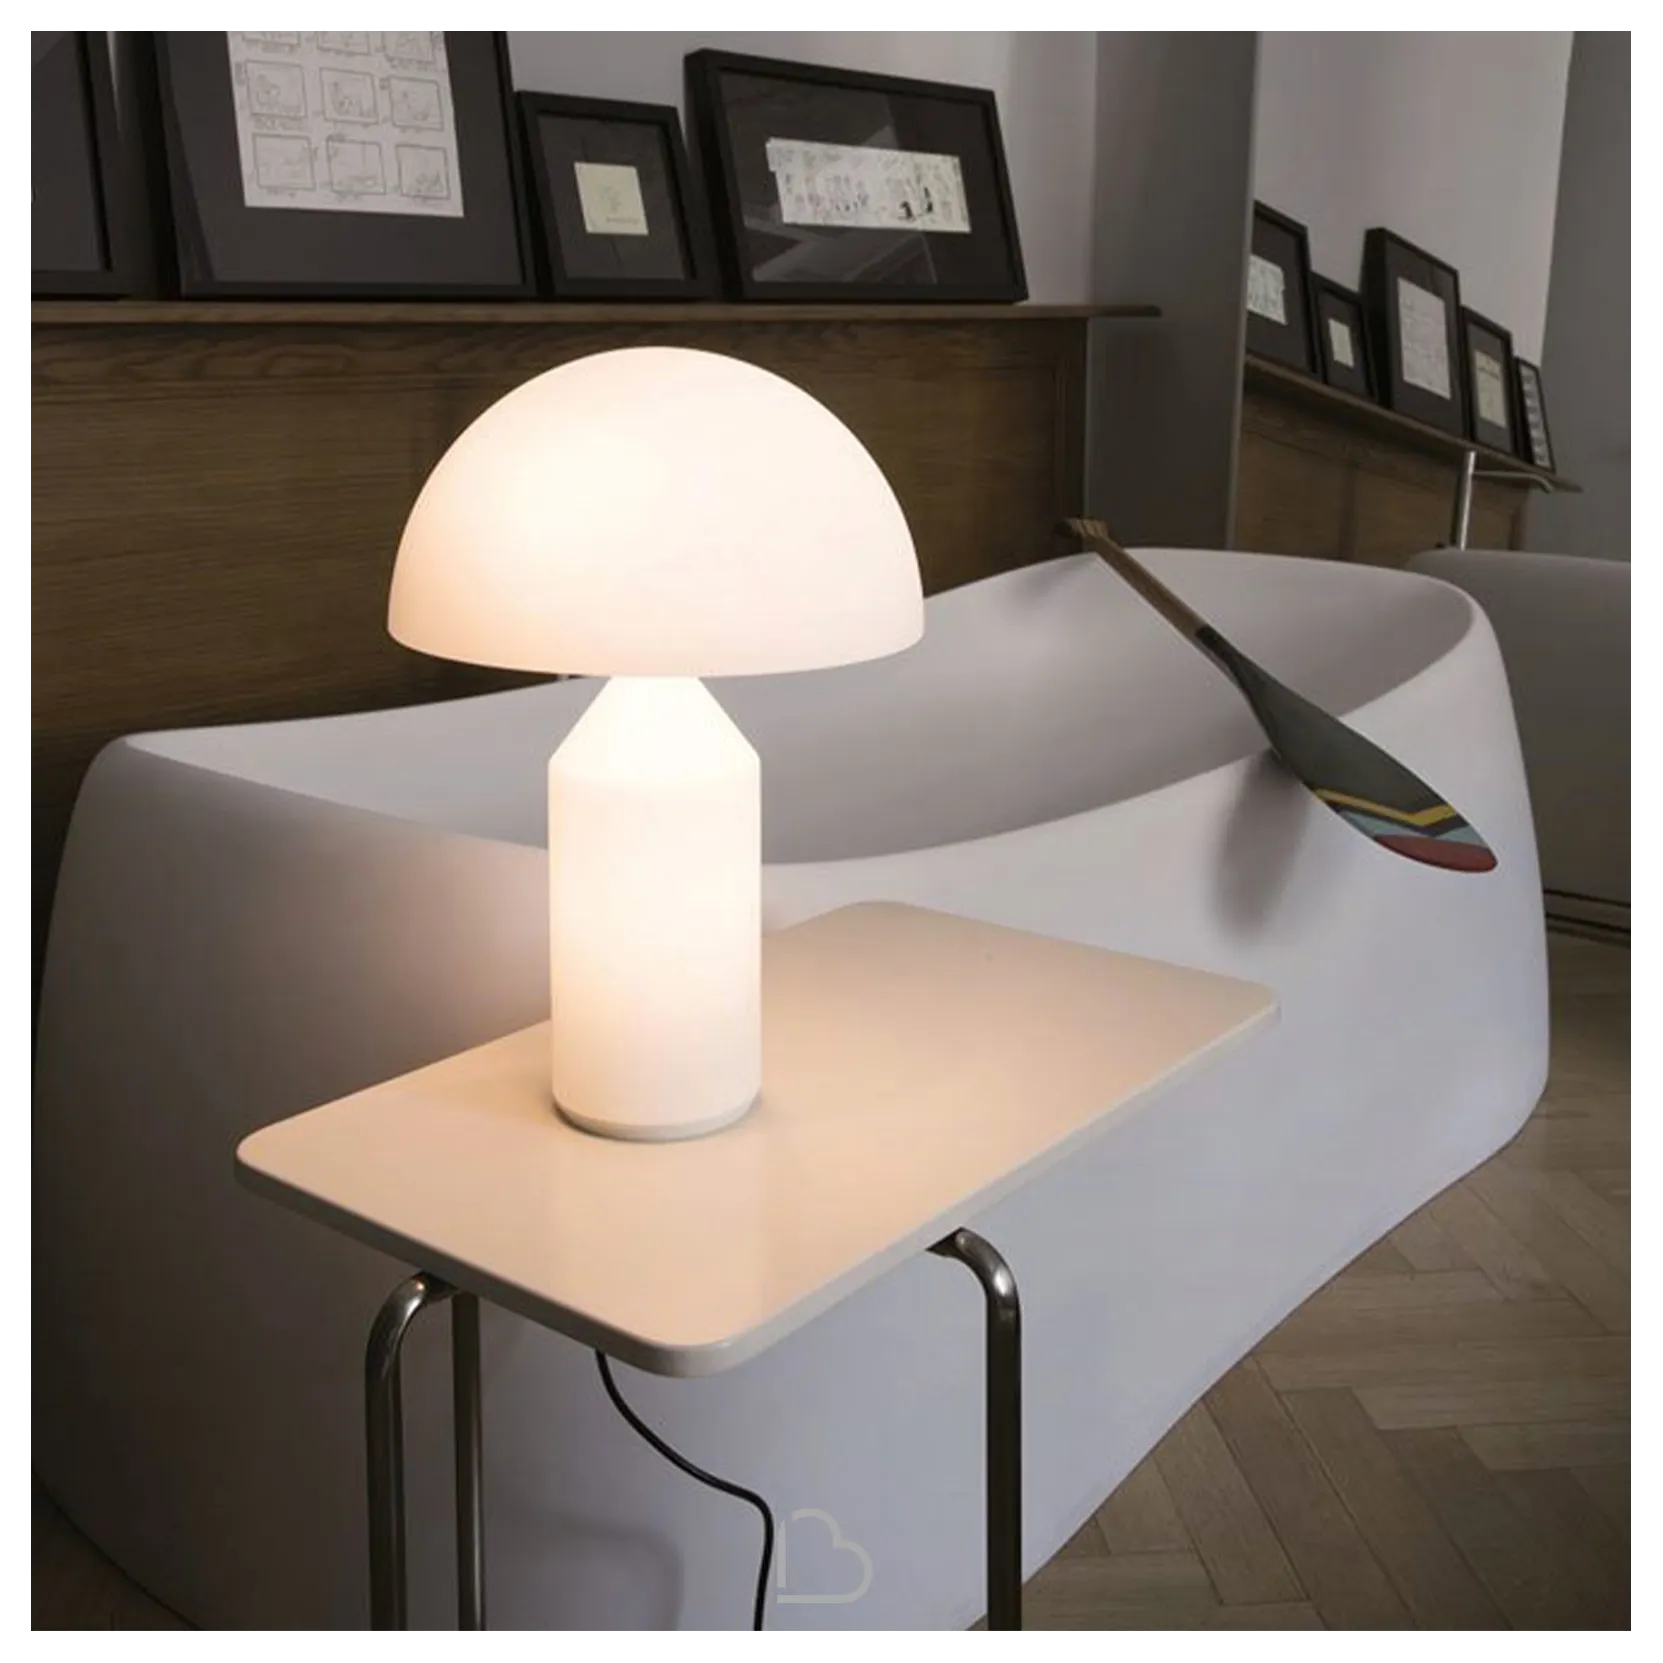 Oluce Atoll Table Lamp In Glass Barthome, Ak47 35 Table Lamp